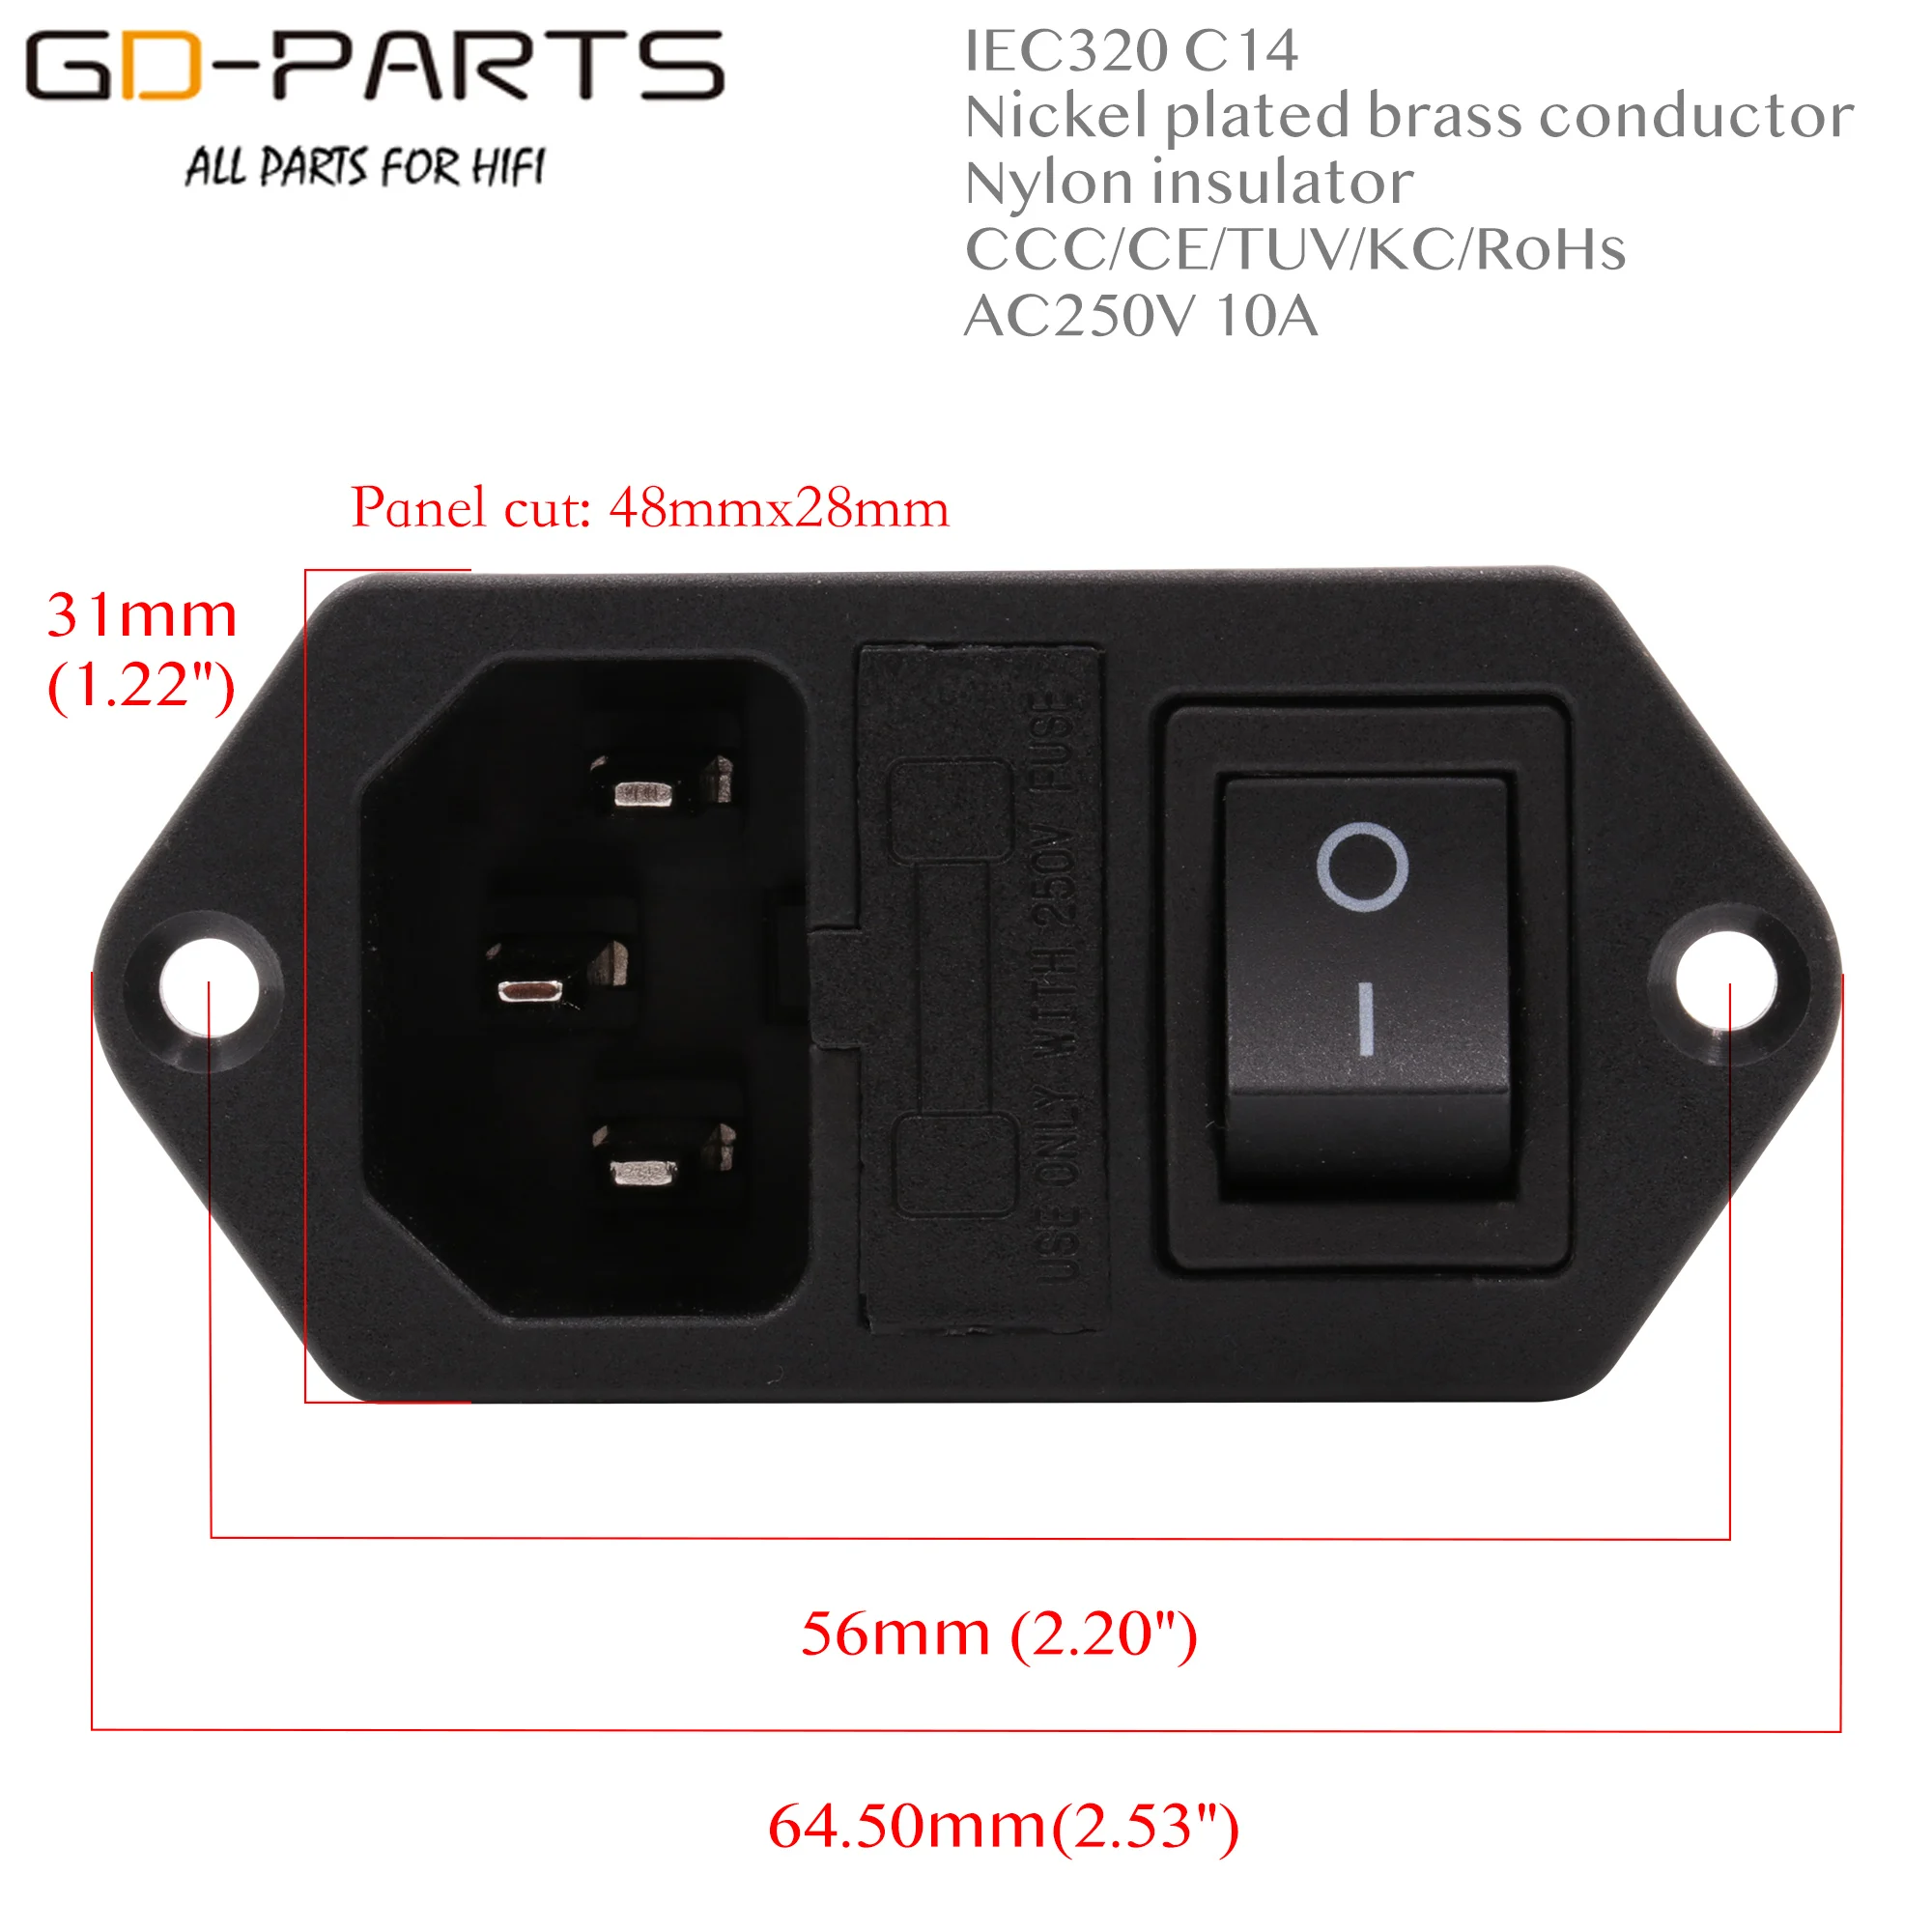 Cable Length: Other Computer Cables AD-061 IEC320 C14 AC Power Cord Inlet Socket Receptacle 250V 10A with ON-Off Red Light Rocker Switch and Fuse Holder RoHs CE 